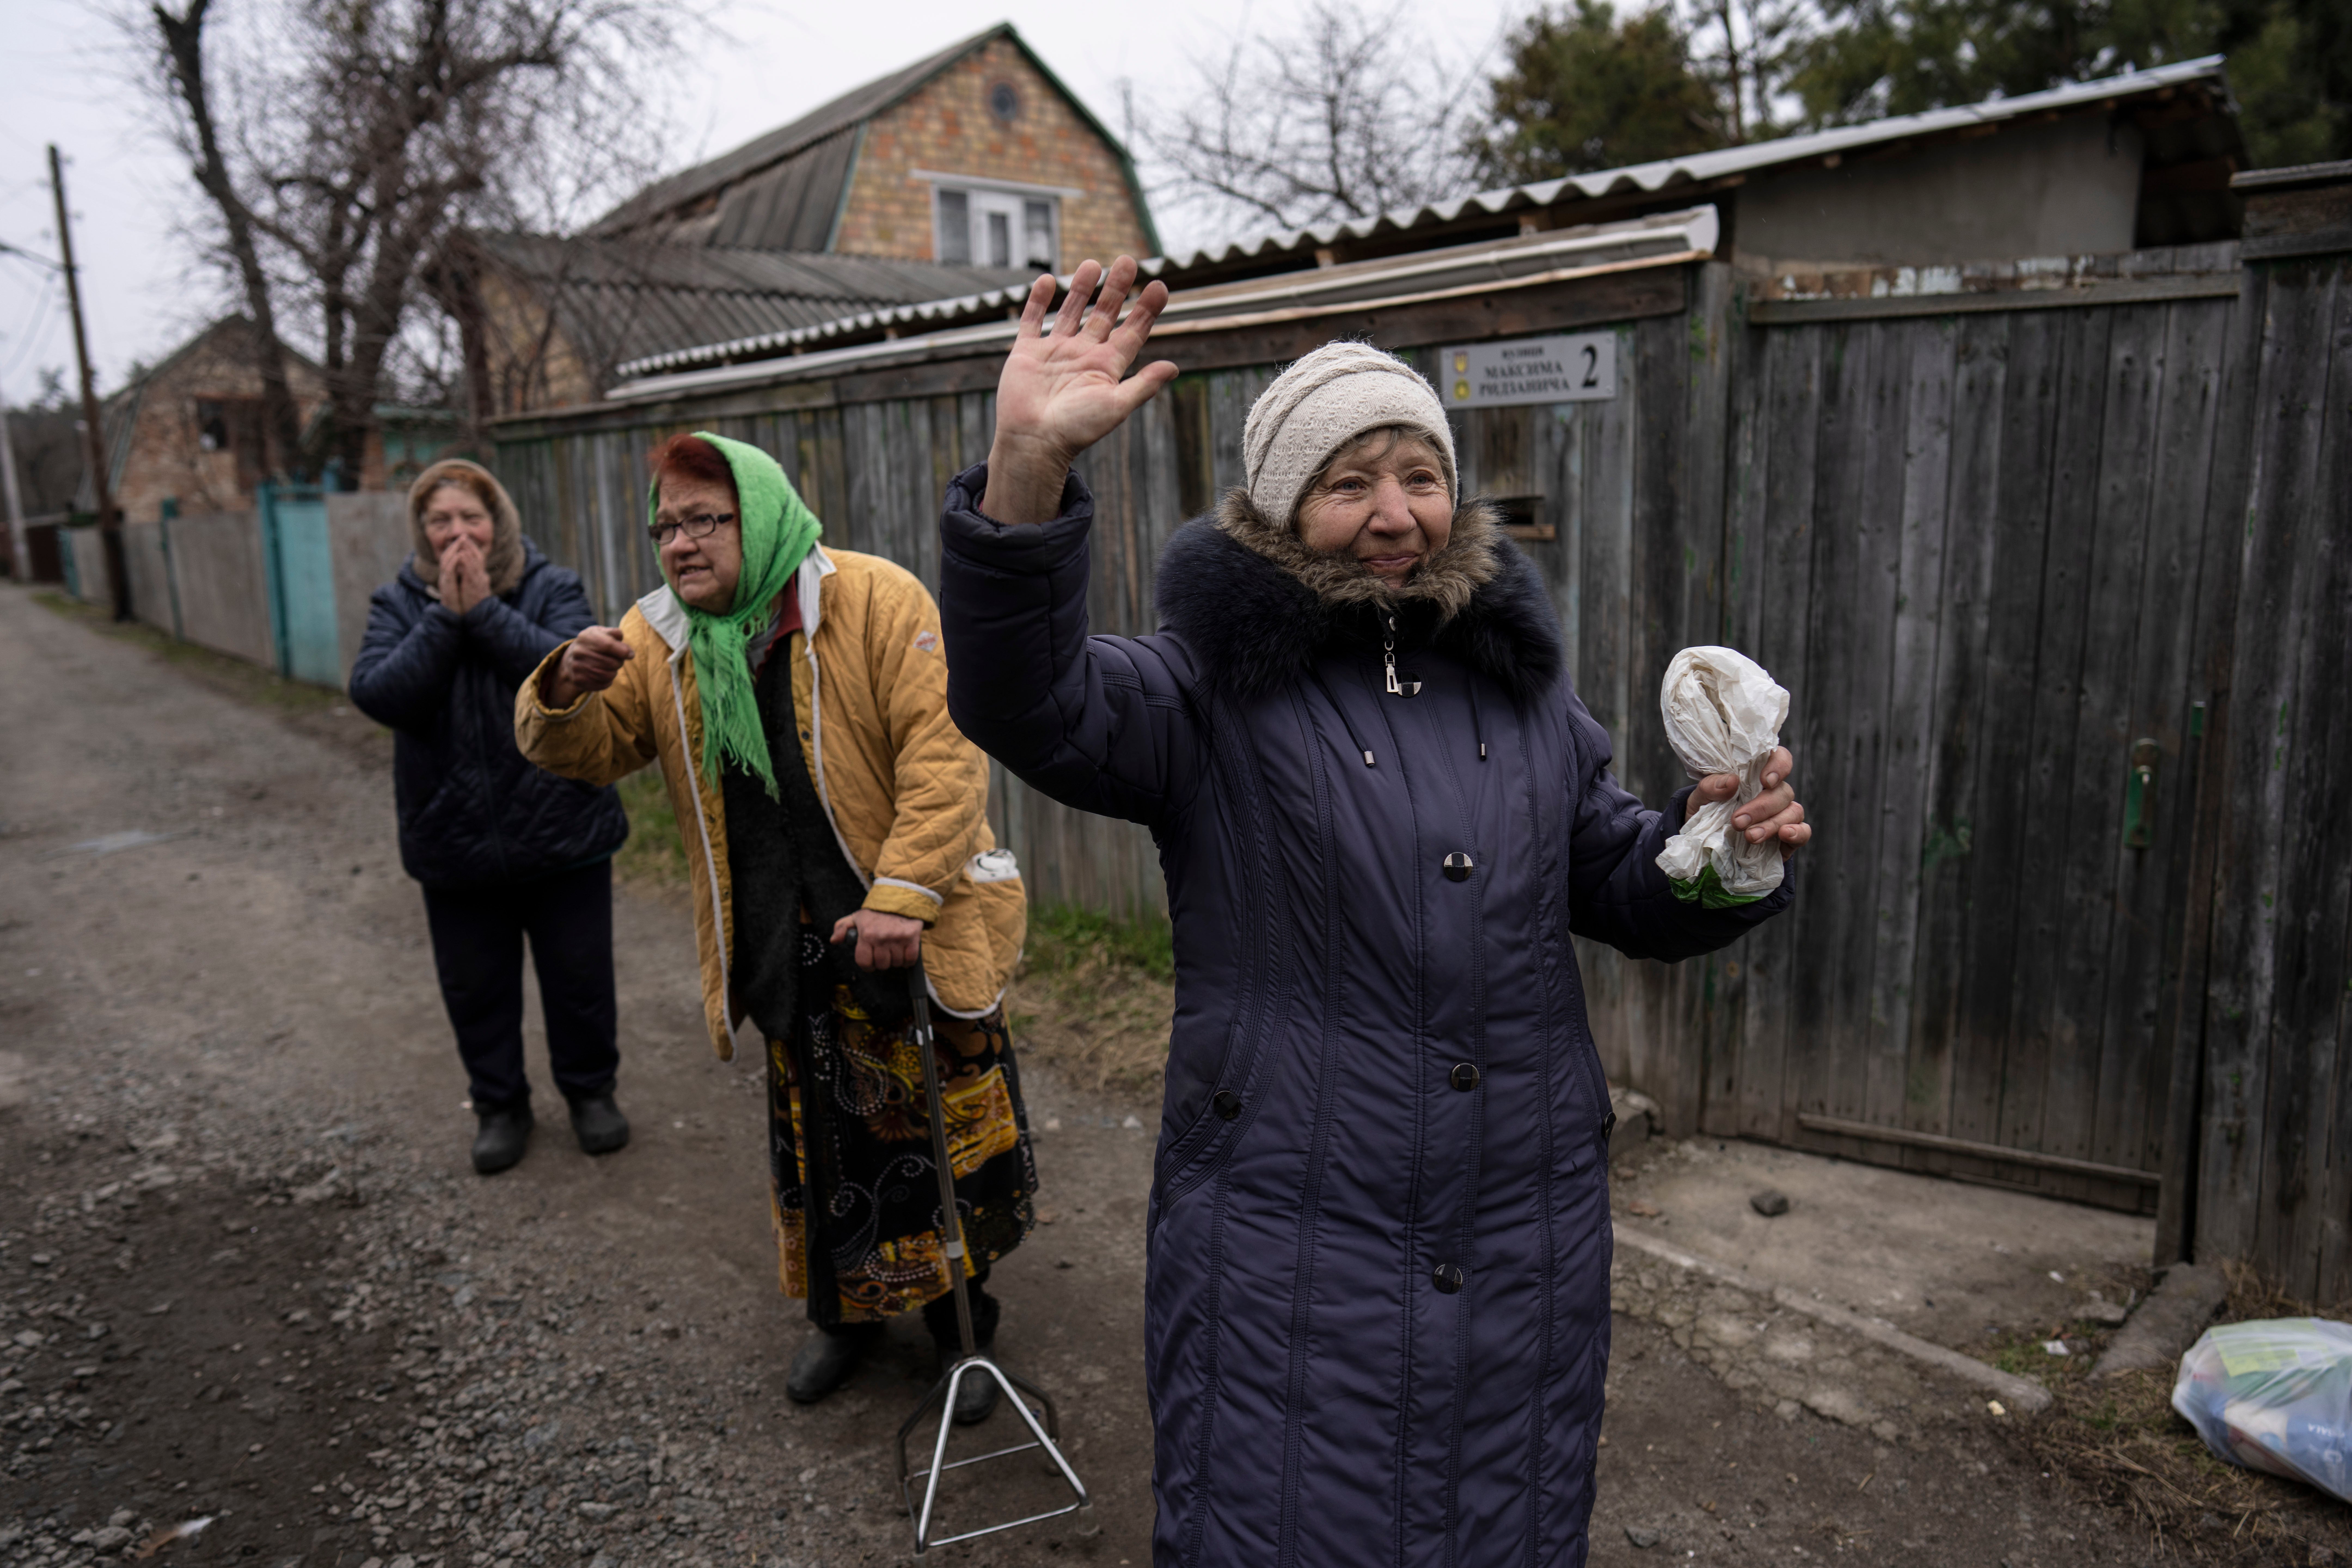 Neighbours of three men killed in the courtyard of a house wave to reporters covering the scene in Bucha, on the outskirts of Kyiv (Rodrigo Abd/AP)